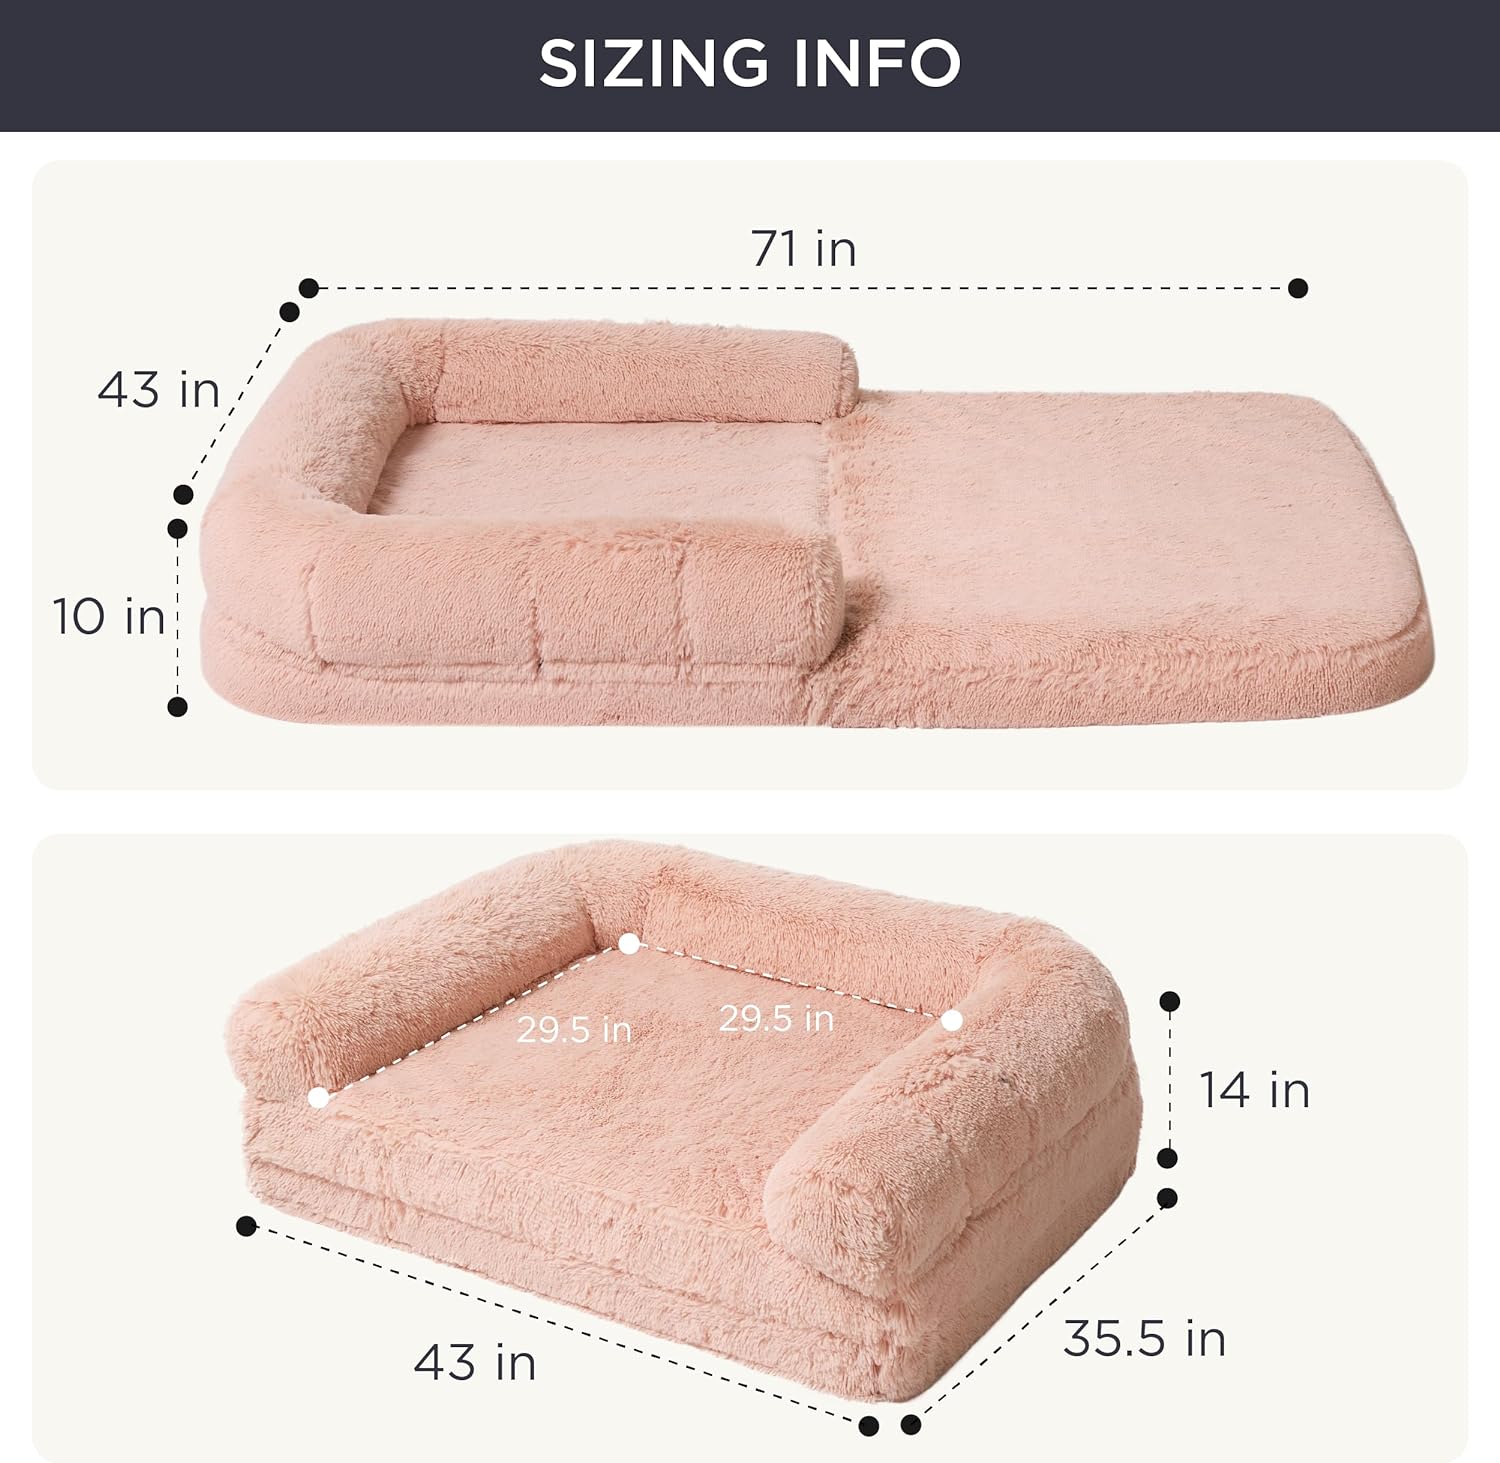 Bedsure Foldable Human Dog Bed for People Adults, 2 in 1 Calming Human Size Giant Dog Bed Fits Pet Families with Egg Foam Supportive Mat and Waterproof Liner, Faux Fur Orthopedic Dog Sofa, Pink